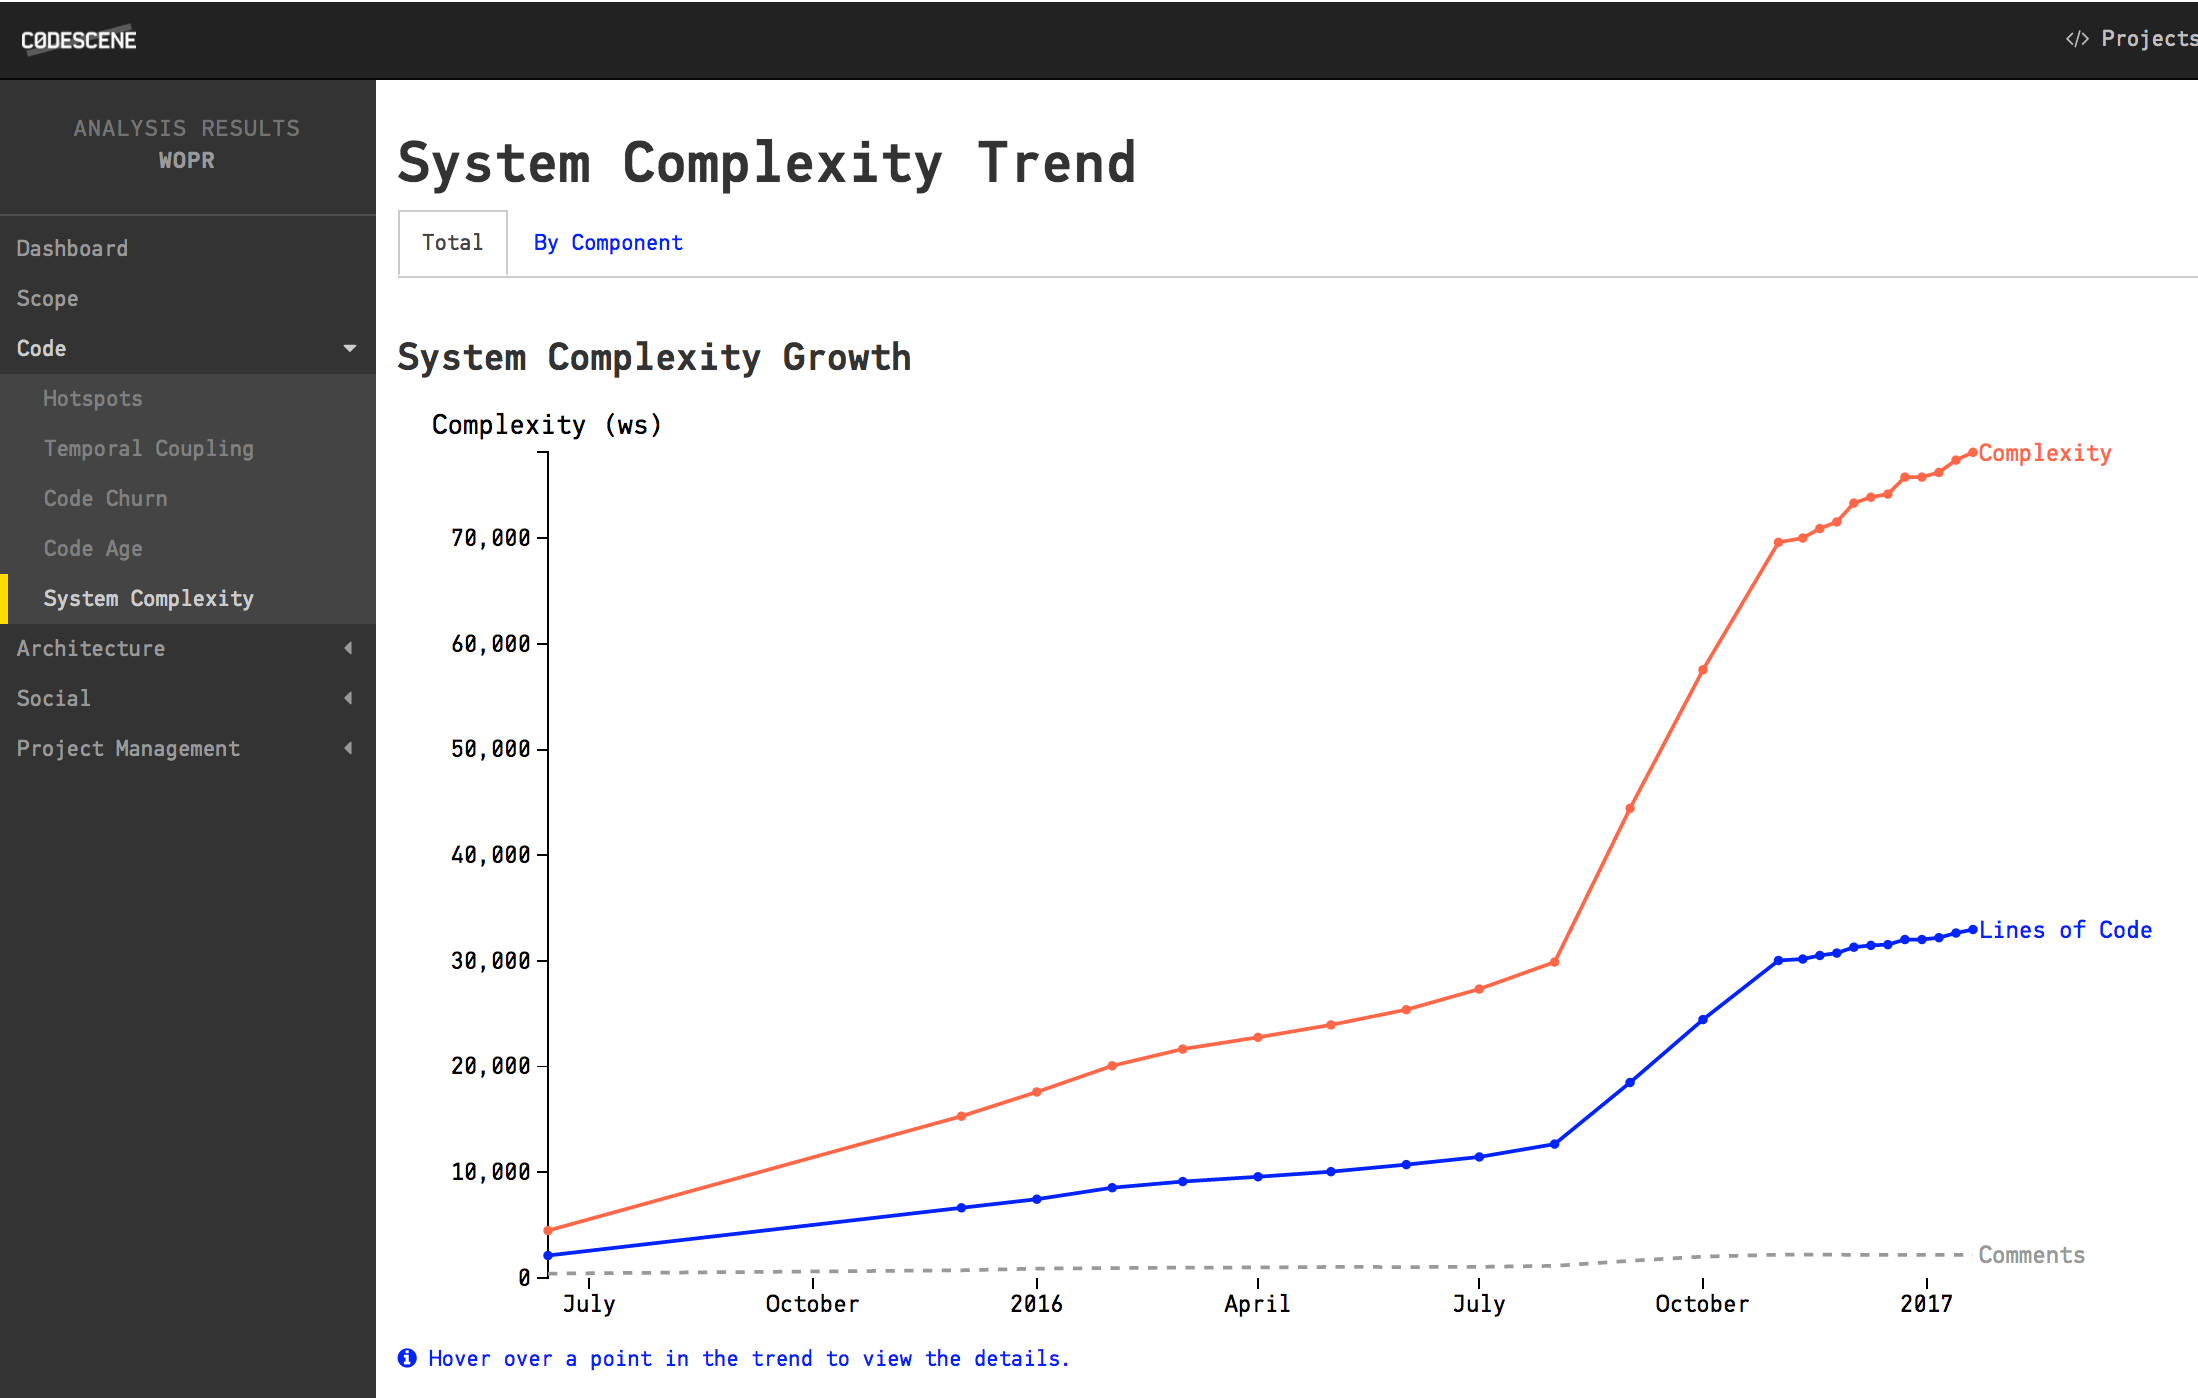 The system complexity trend